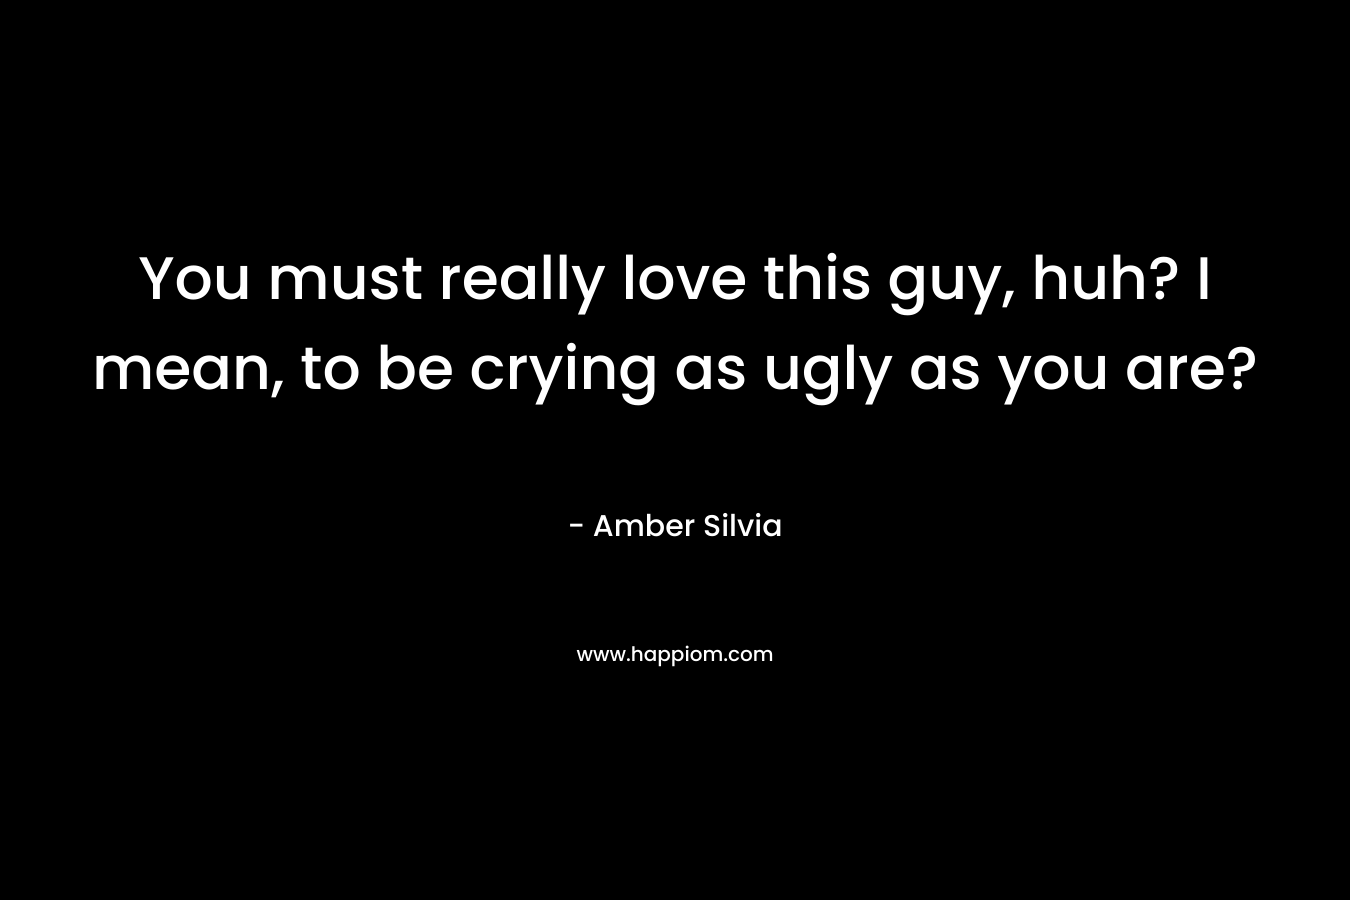 You must really love this guy, huh? I mean, to be crying as ugly as you are? – Amber Silvia